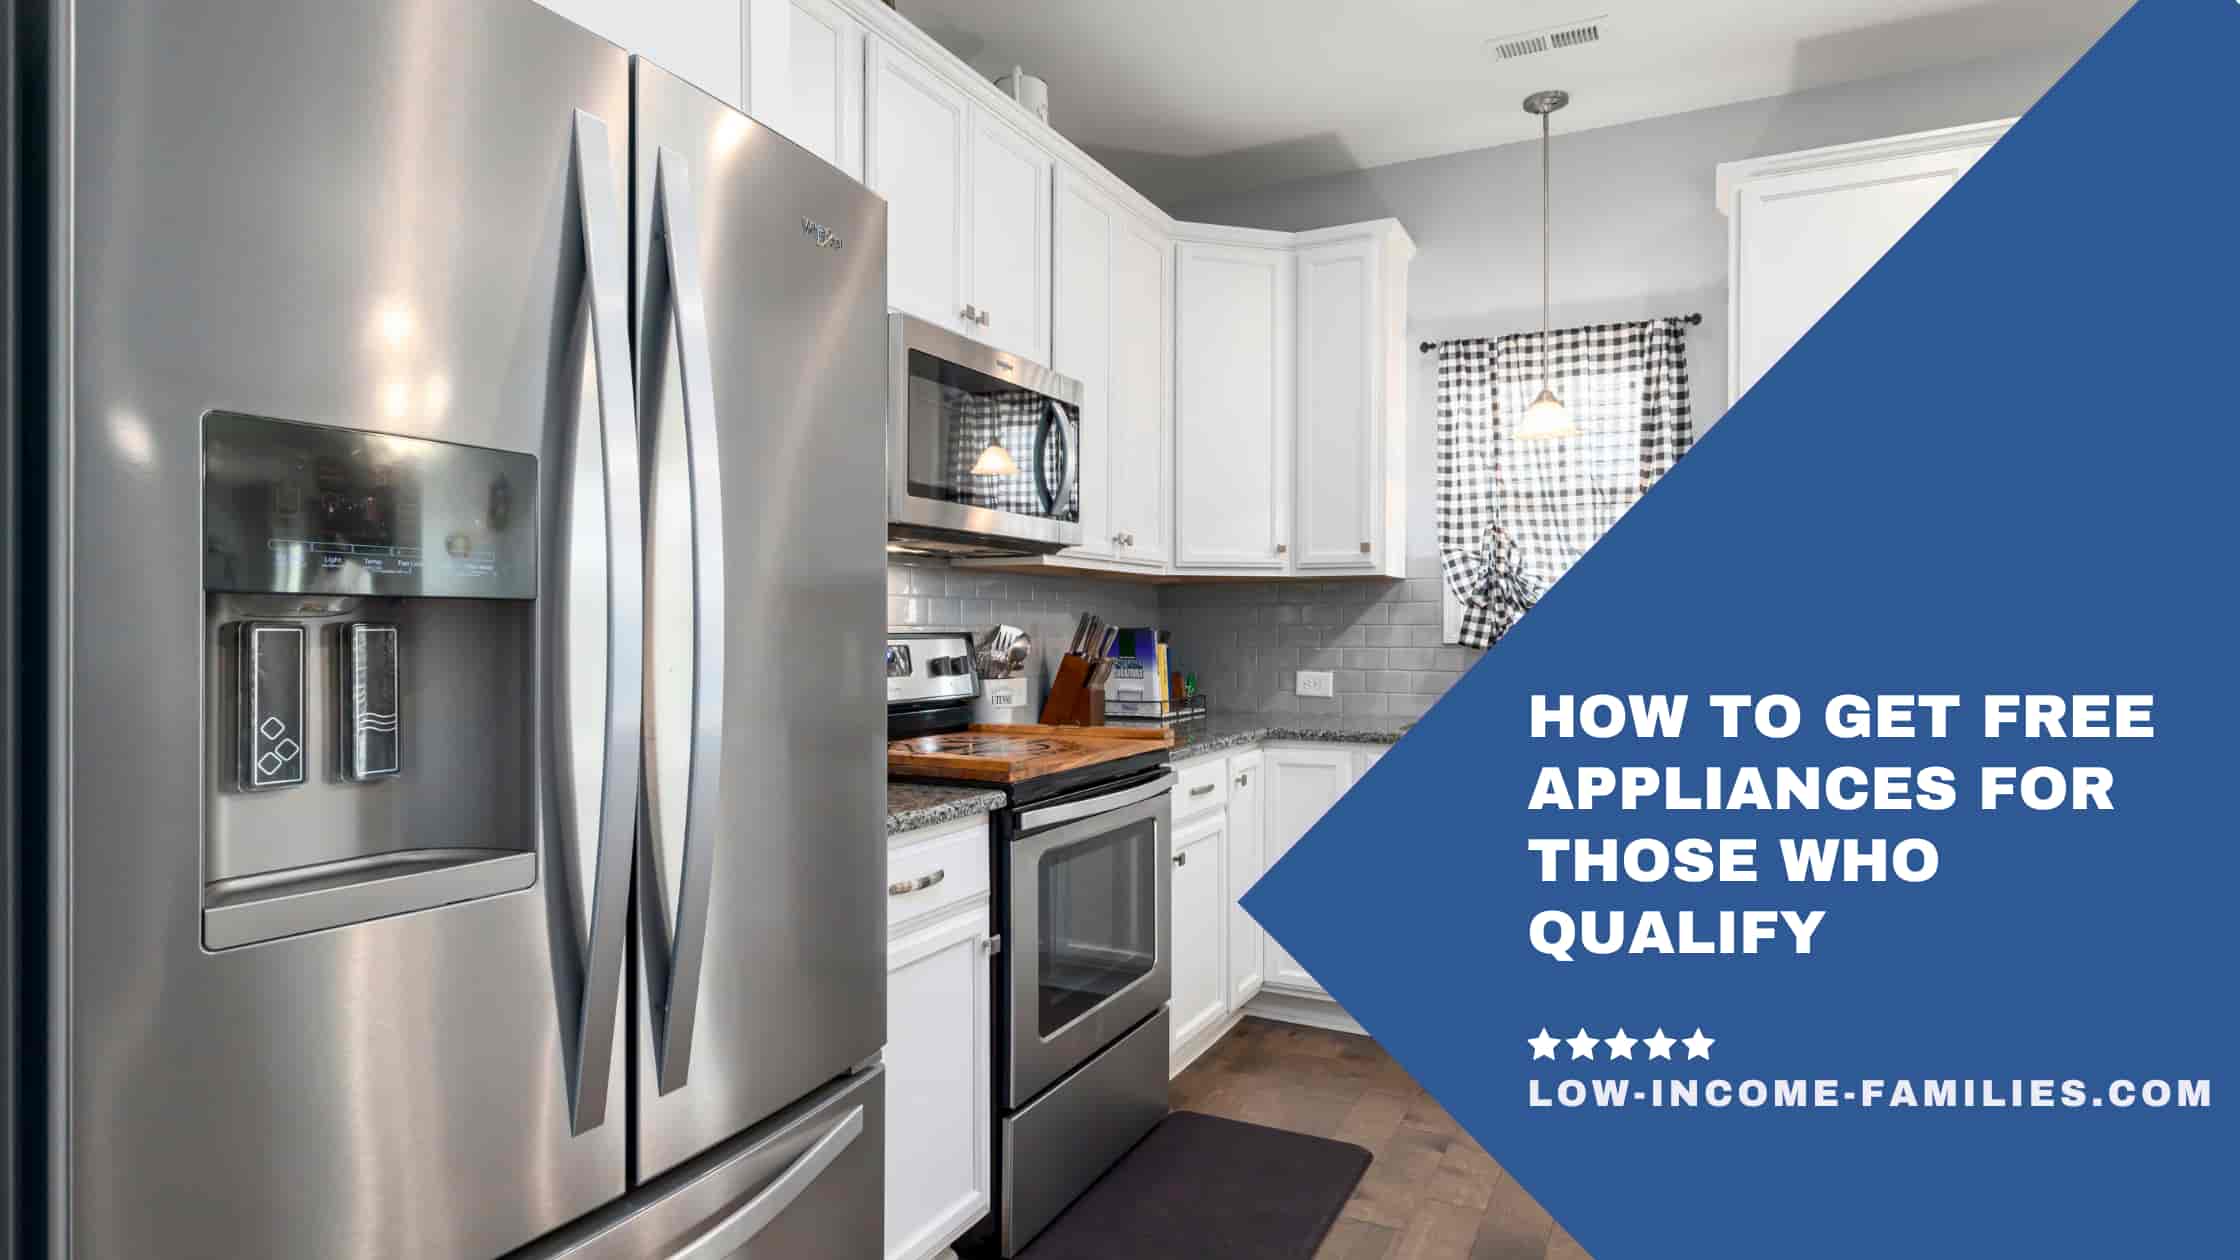 How to Get Free Appliances for Those Who Qualify